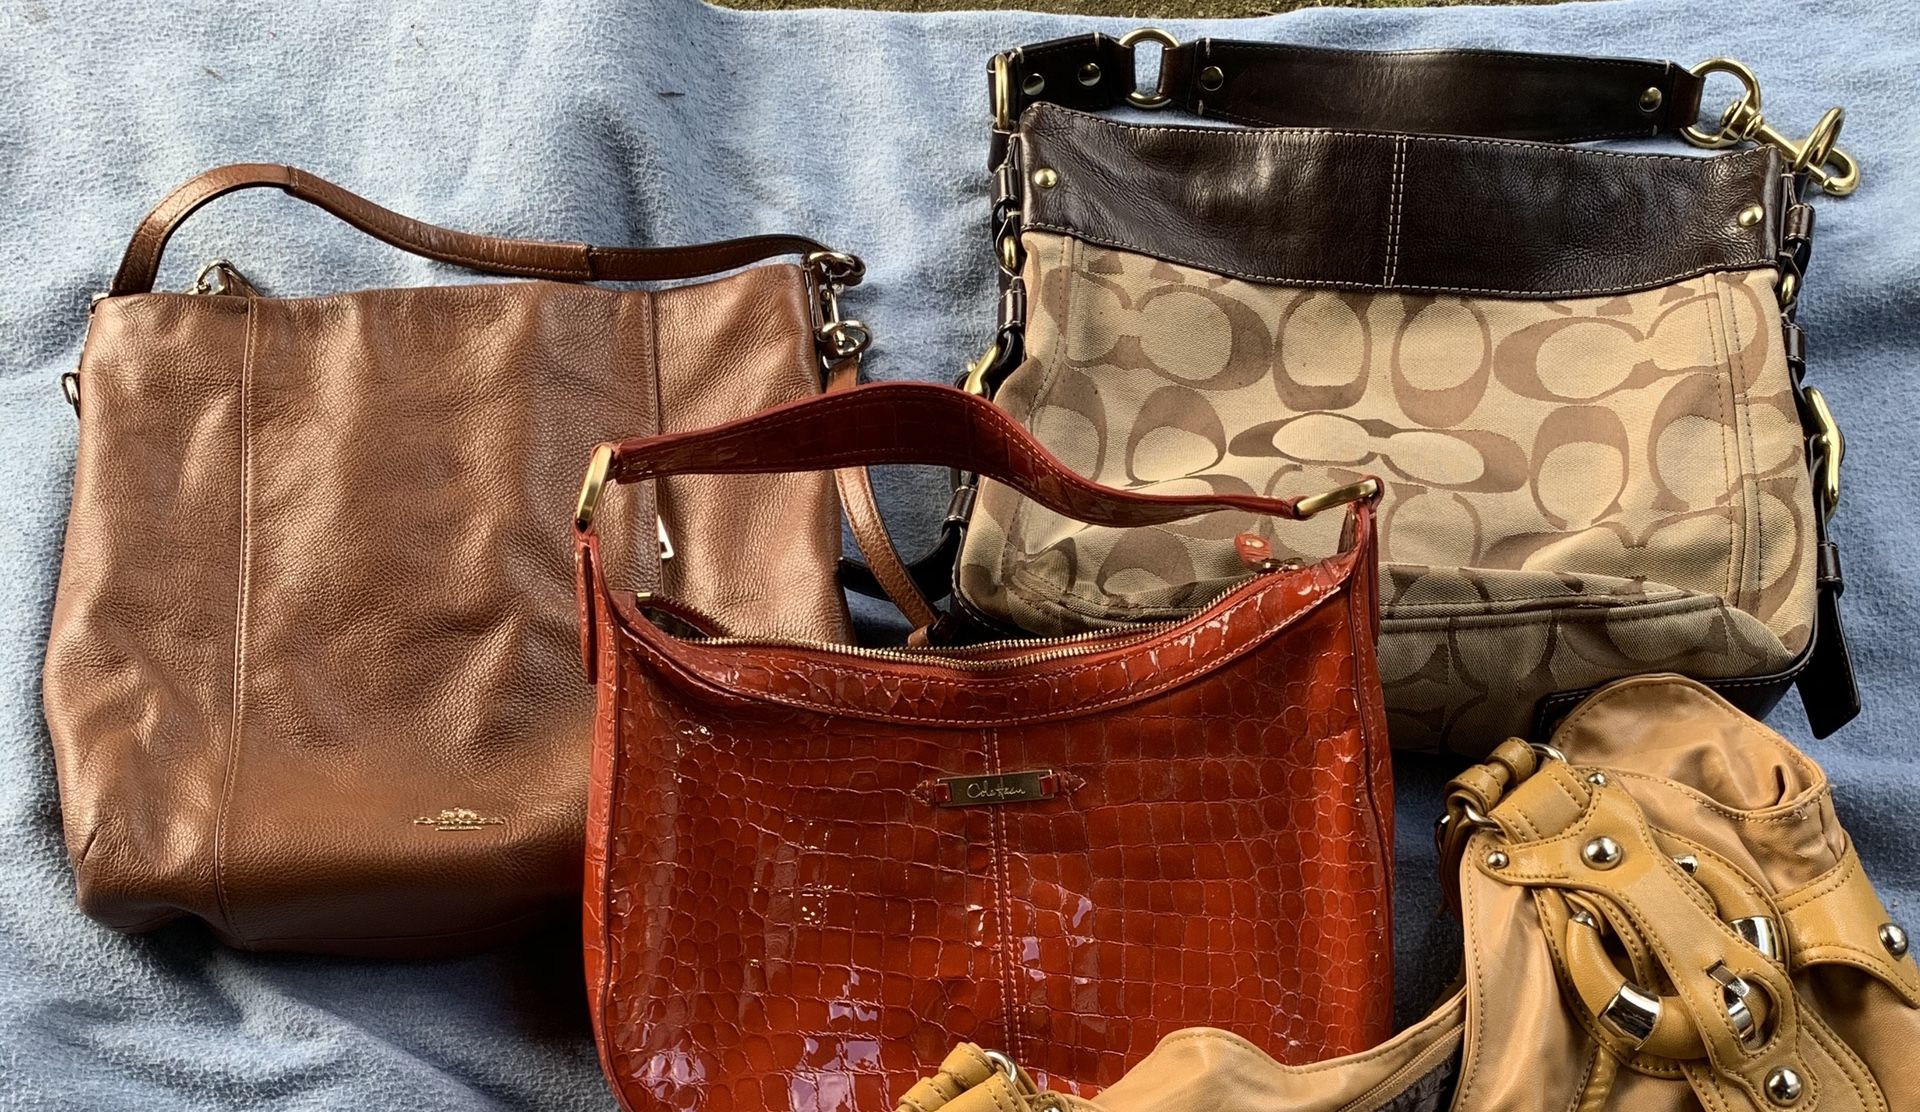 2 Coach Purses and 1 Cole Haan Purse